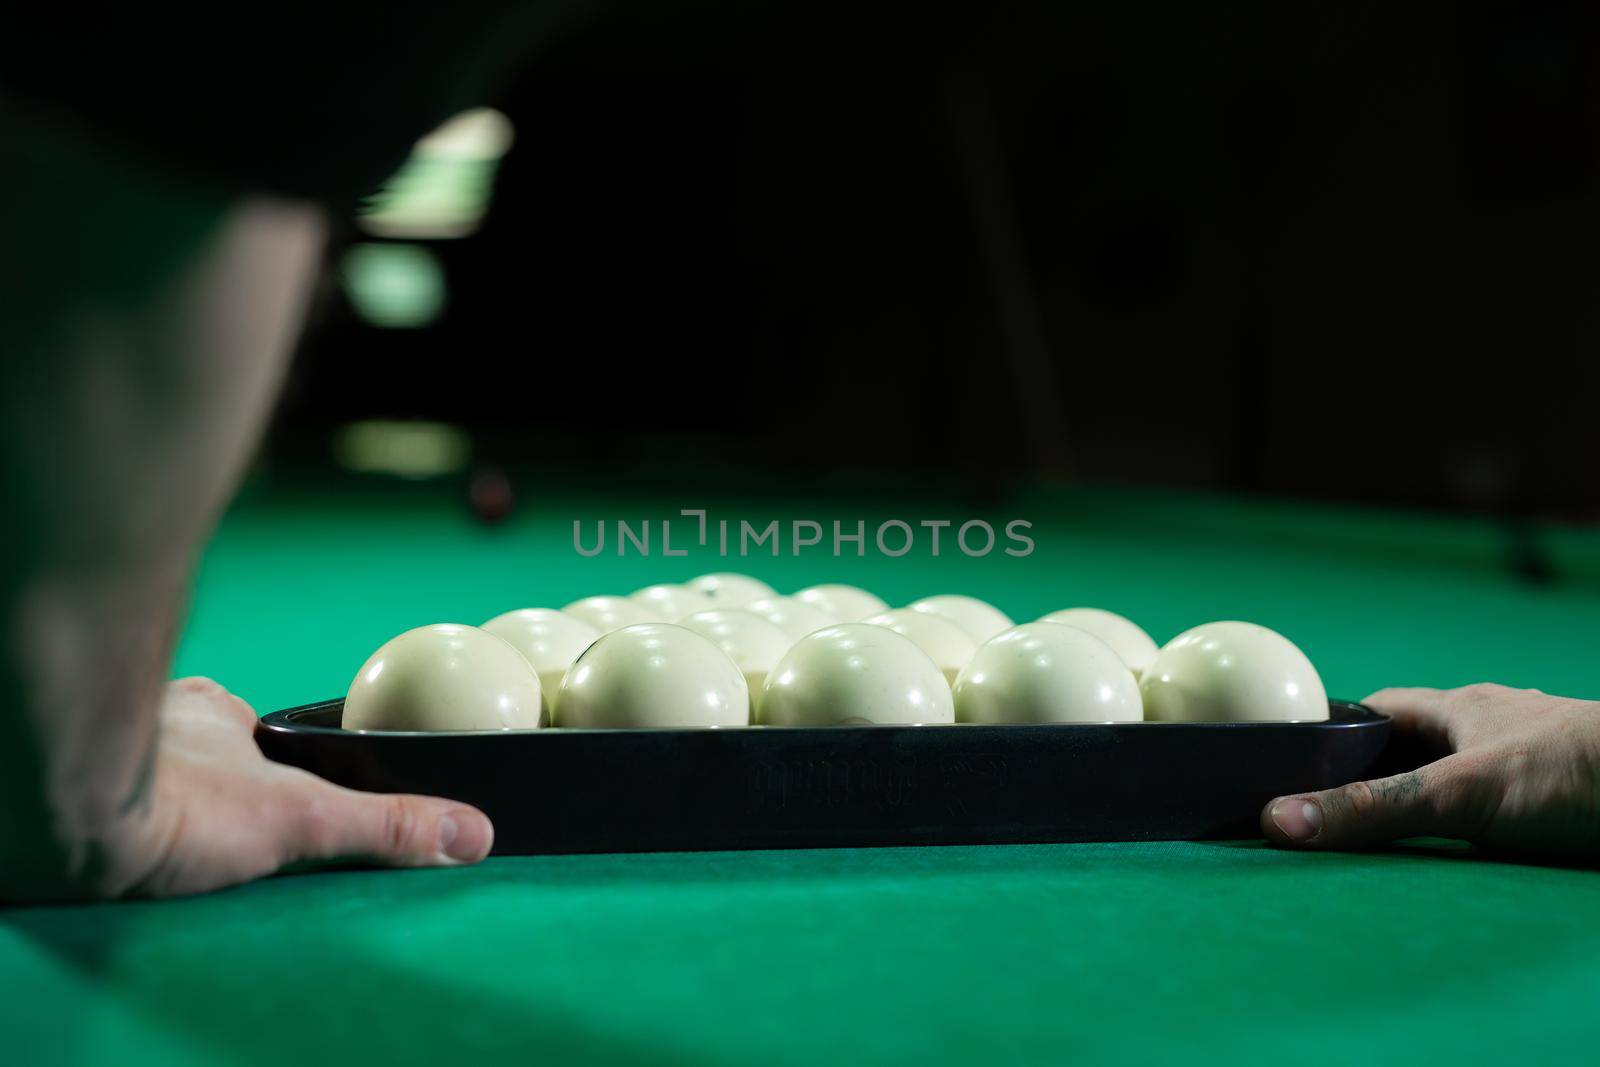 Triangle of billiard balls. A man getting ready to start a game of billiards